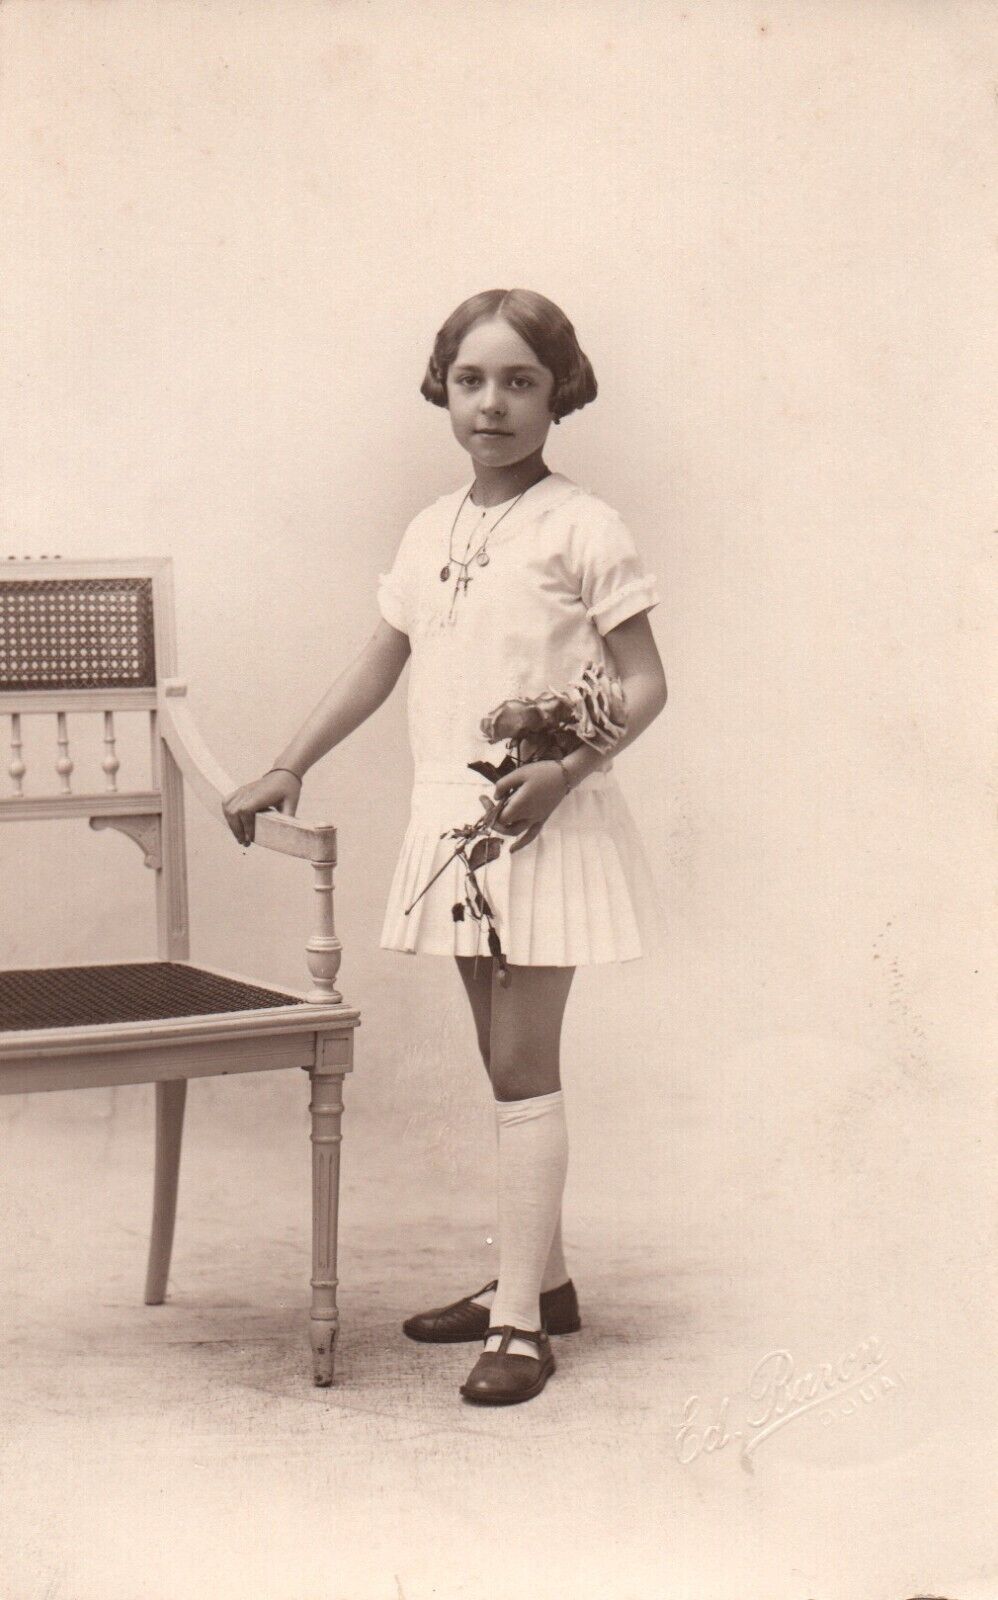 CPA - Portrait - Girl in White Skirt Carrying a Flower